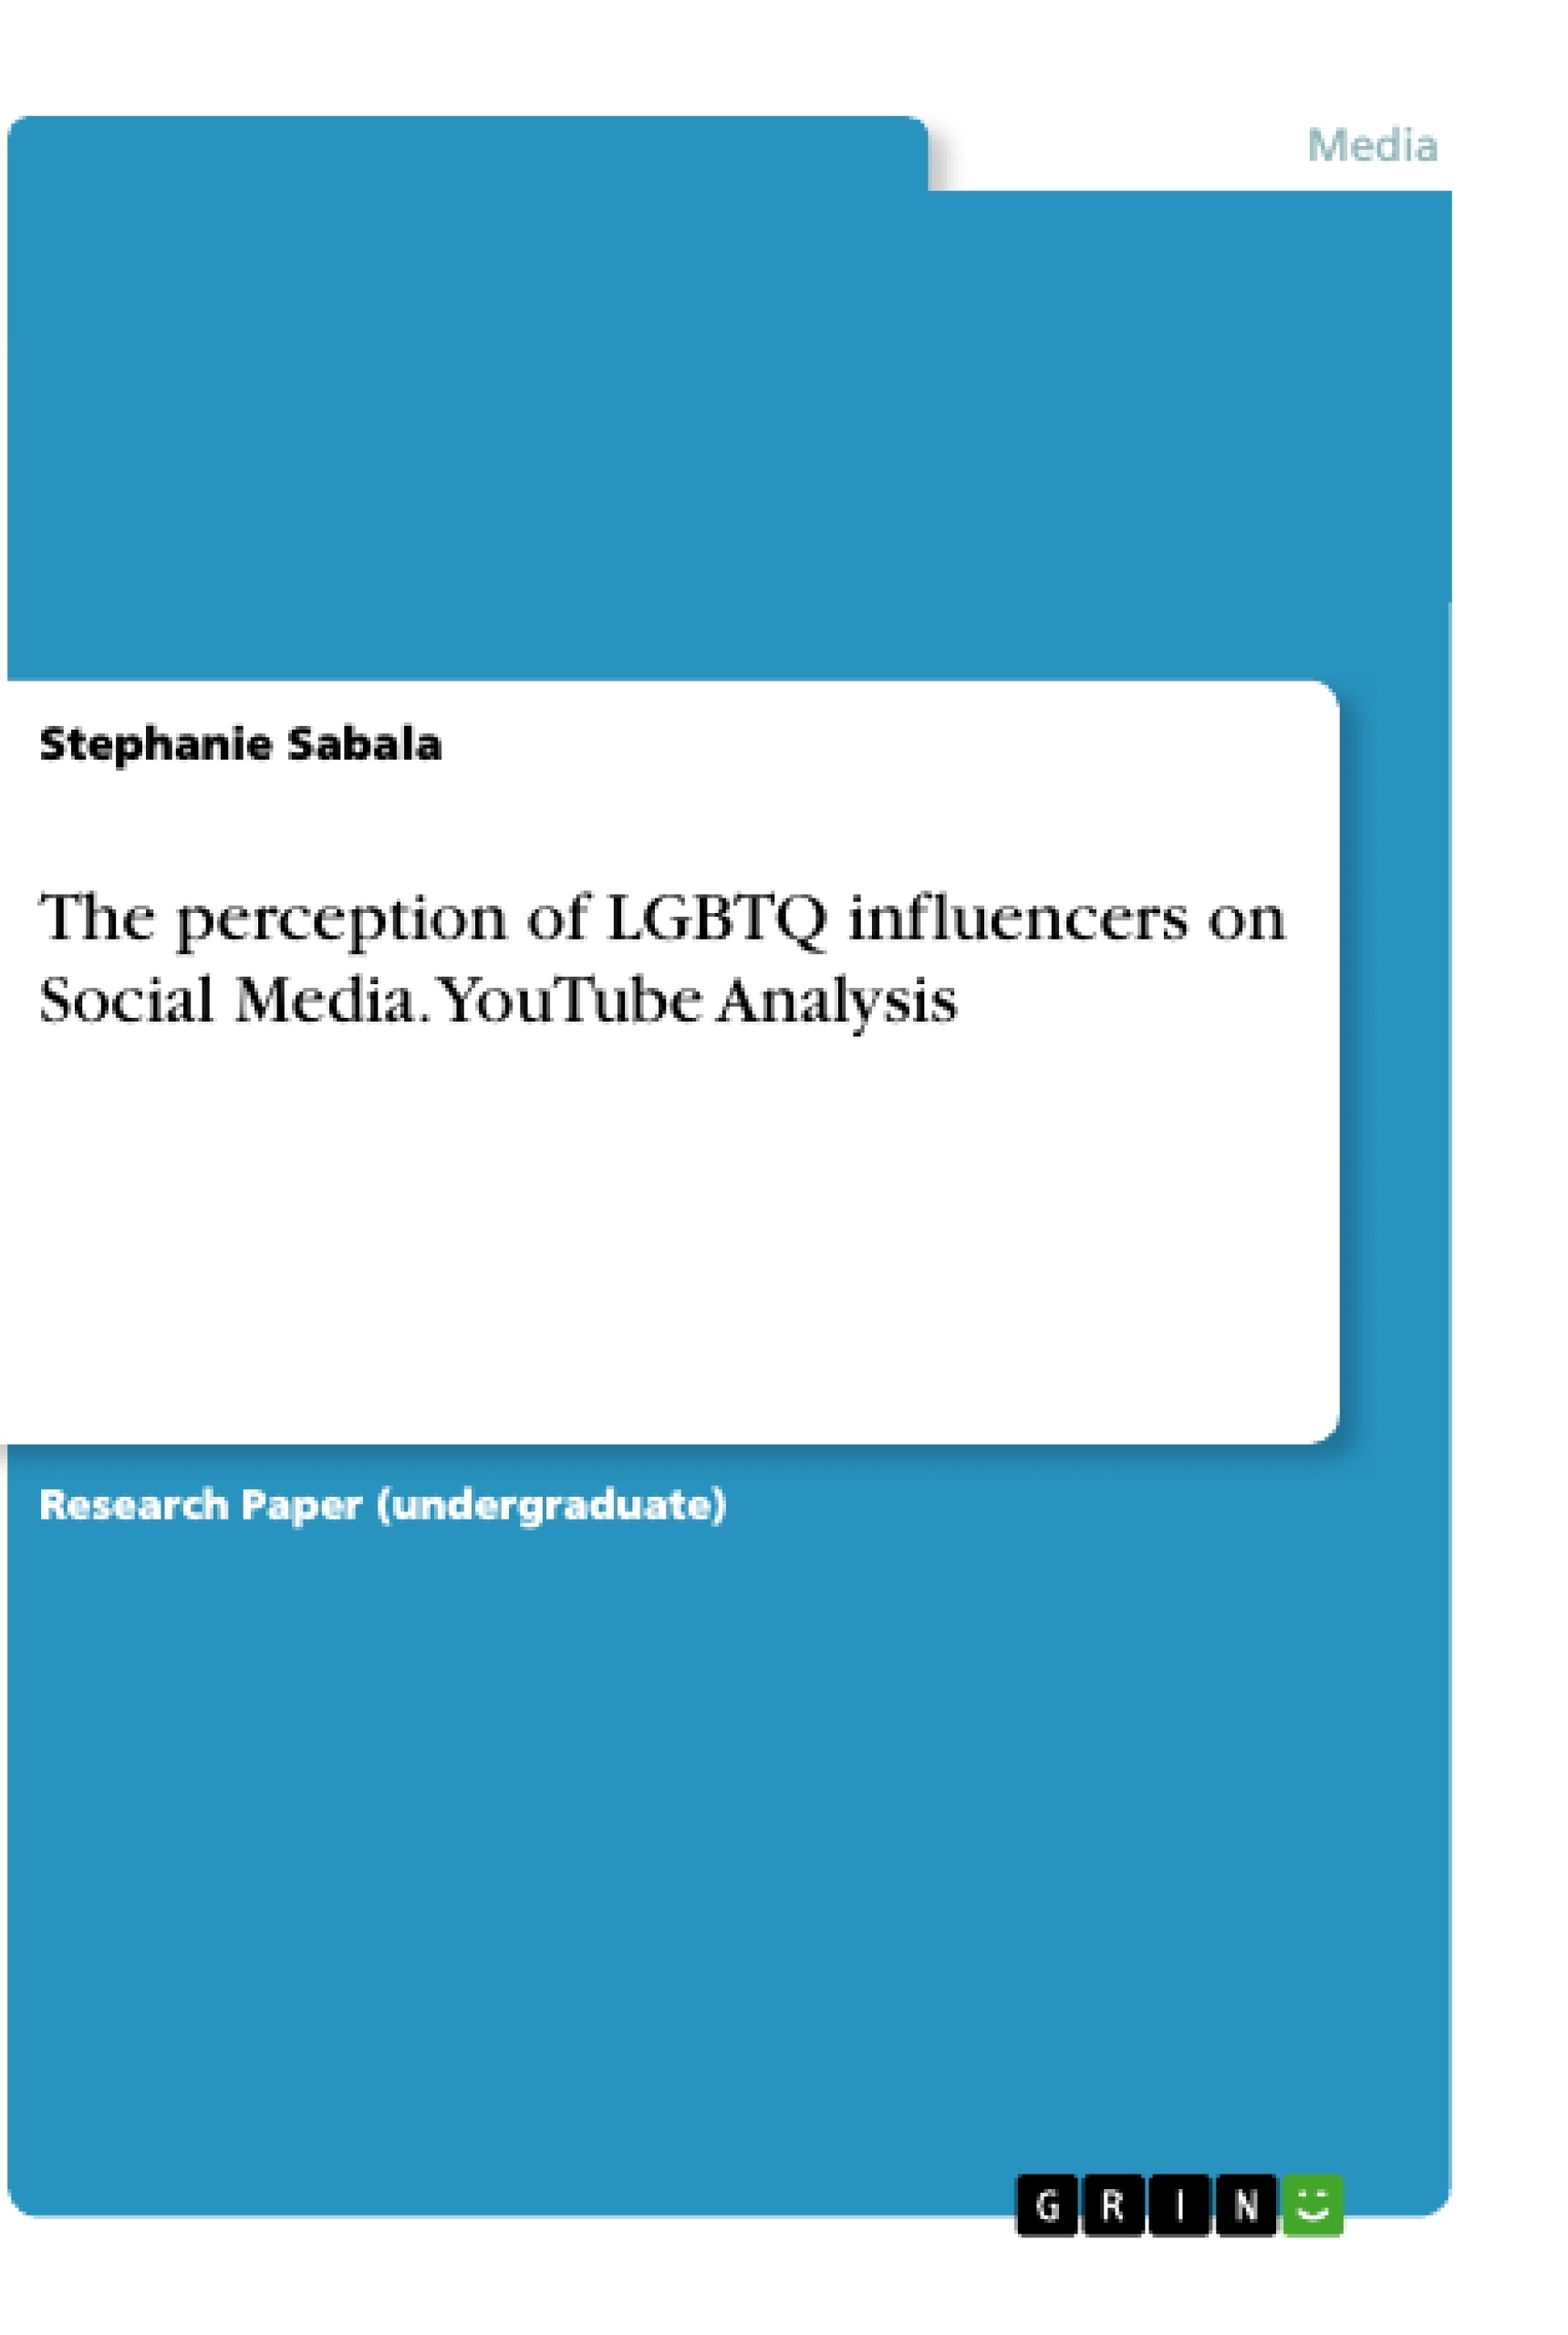 Titre: The perception of LGBTQ influencers on Social Media. YouTube Analysis